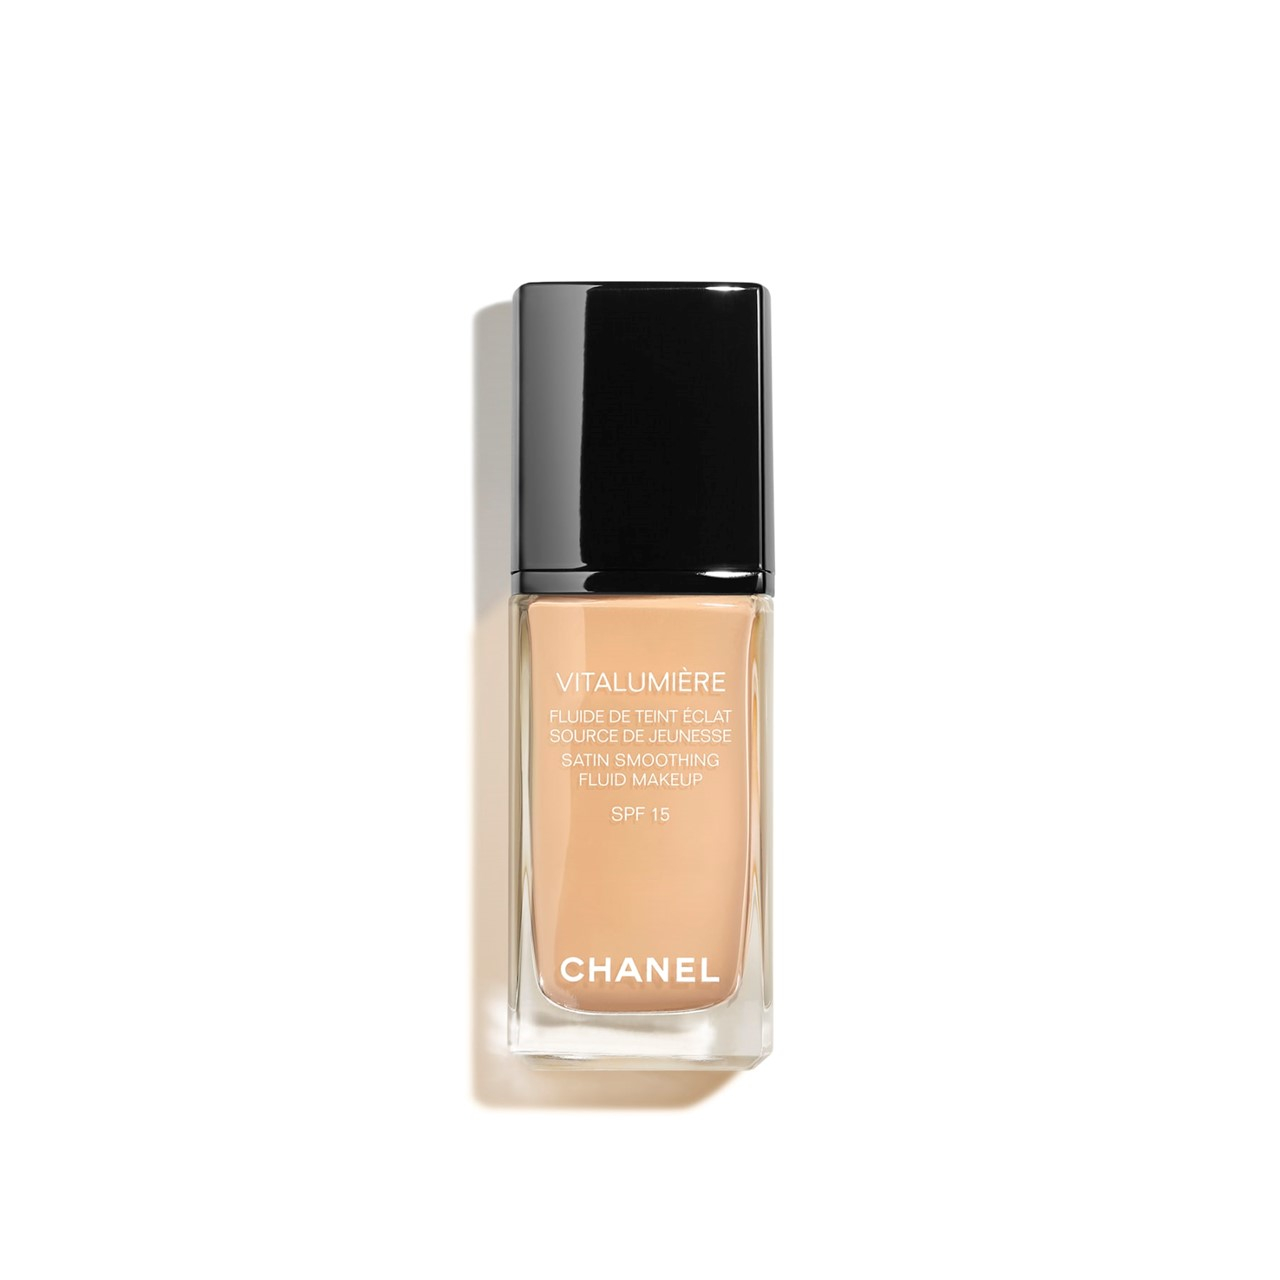 Vitalumiere Satin Smoothing Fluid Makeup SPF 15 - 70 Beige by Chanel for  Women - 1 oz Foundation